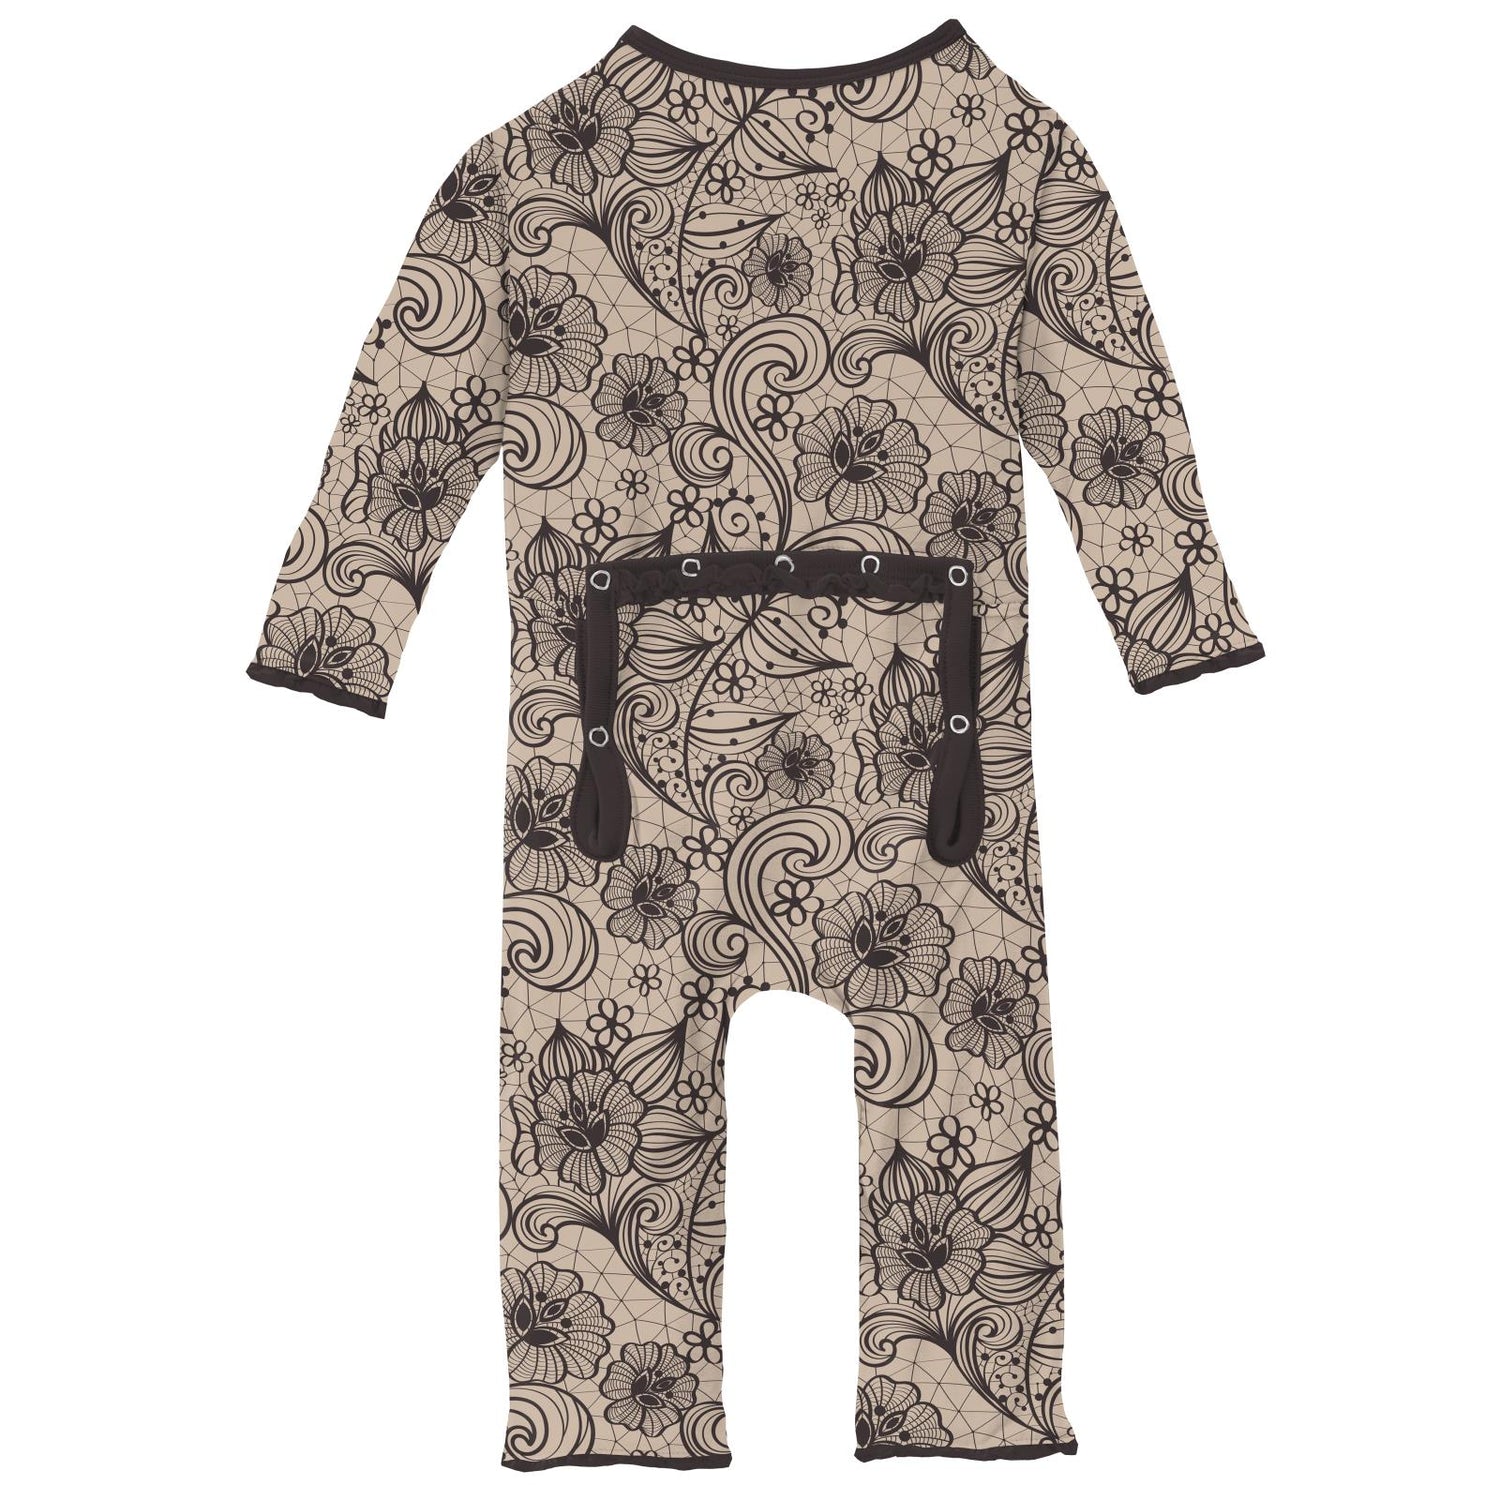 Print Muffin Ruffle Coverall with Zipper in Burlap Lace